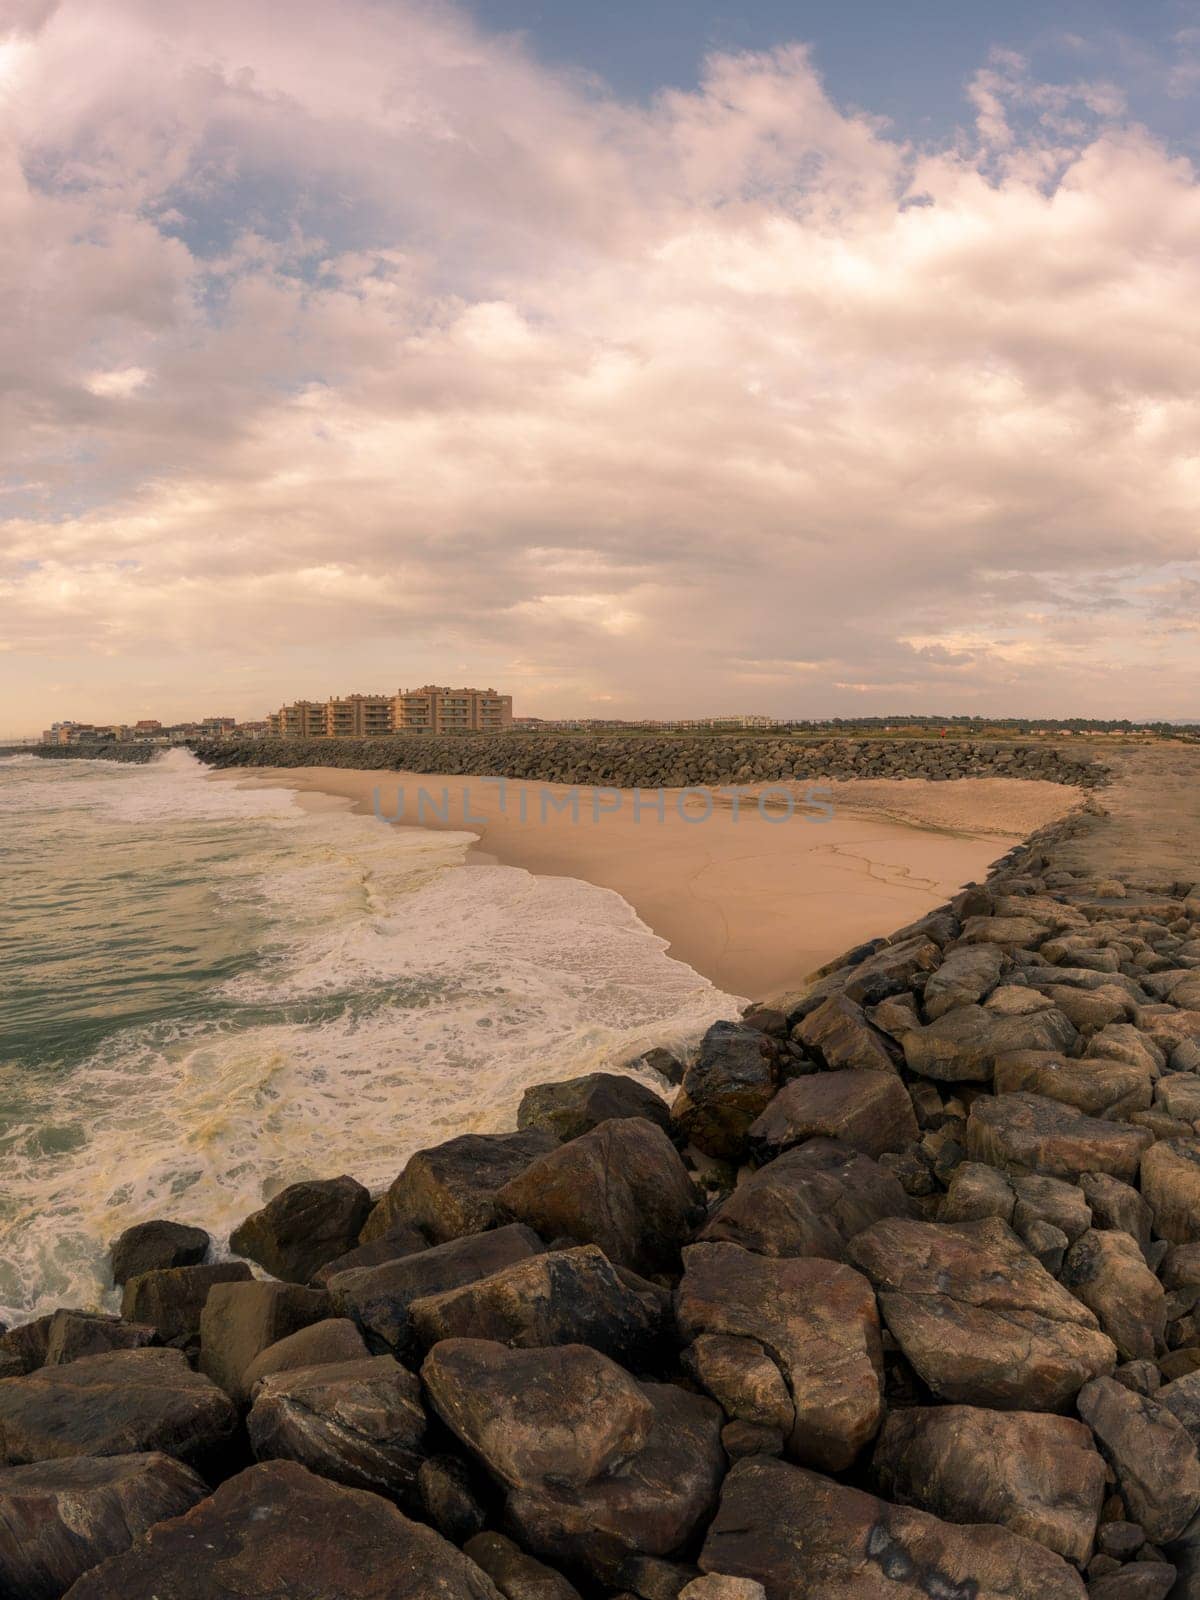 View south of Furadouro beach in Ovar on a stormy day at sunset.